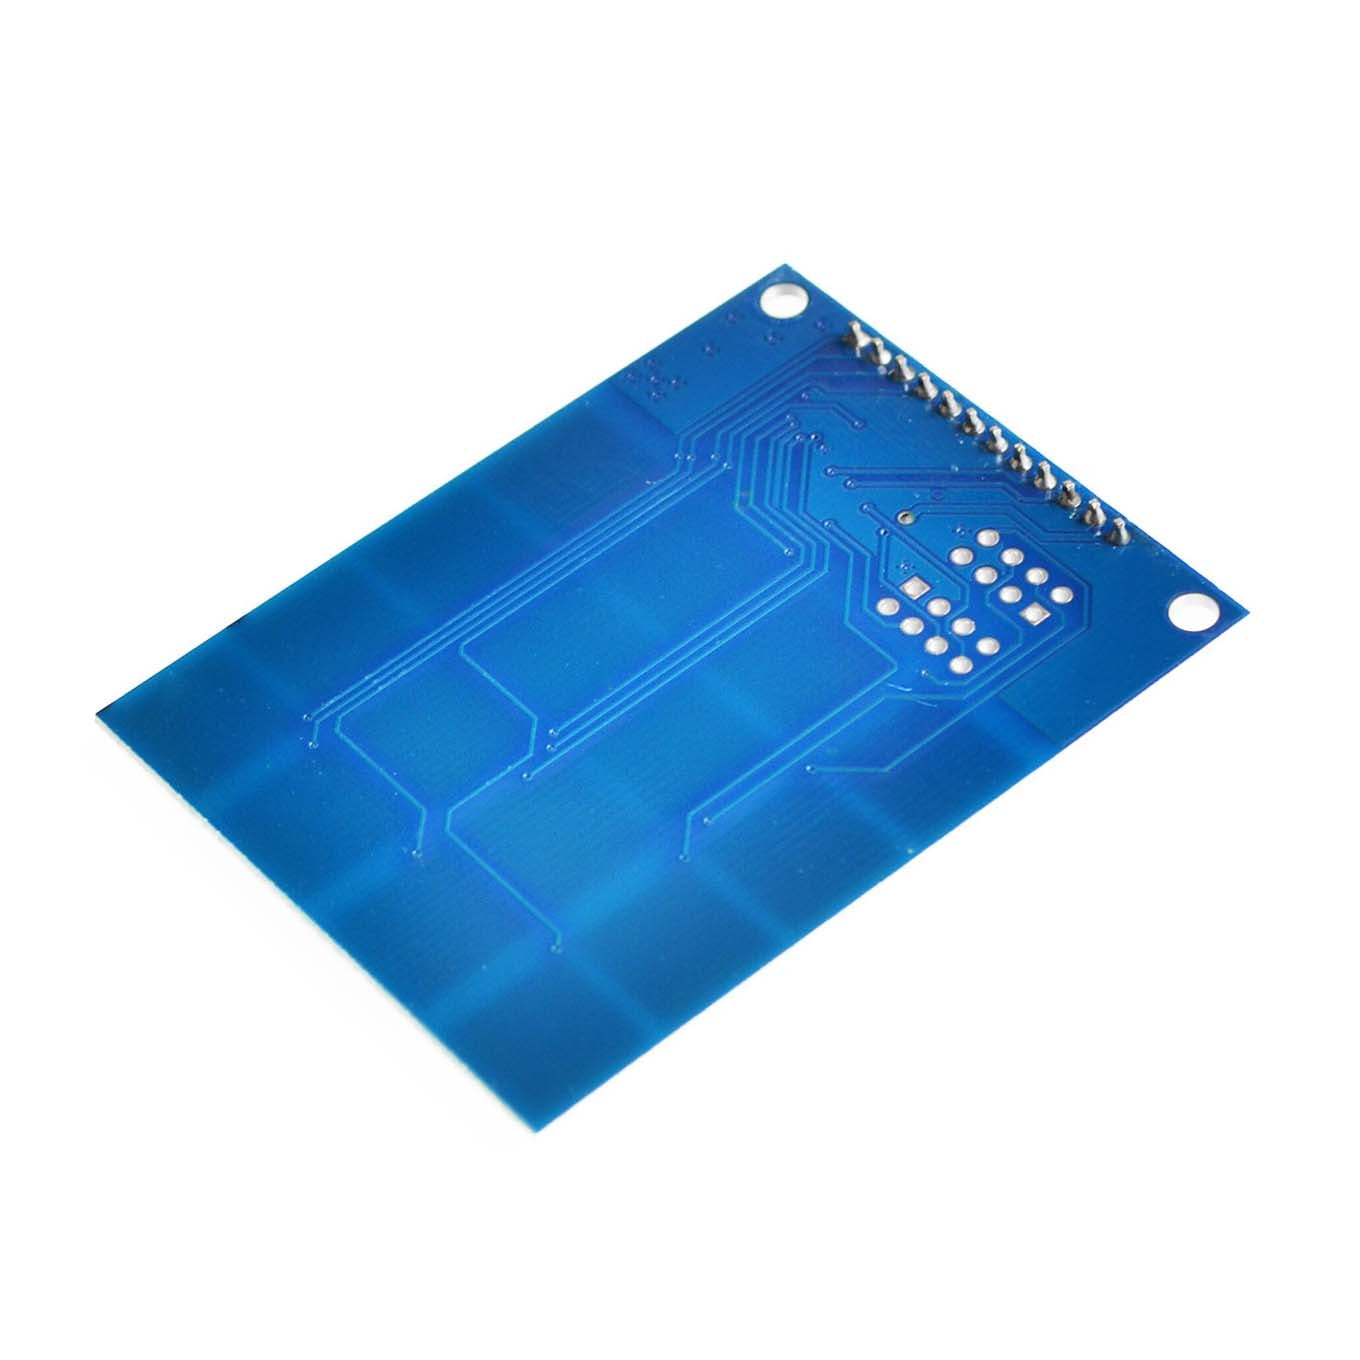 Capacitive Touch Num Pad Shield 16-Key